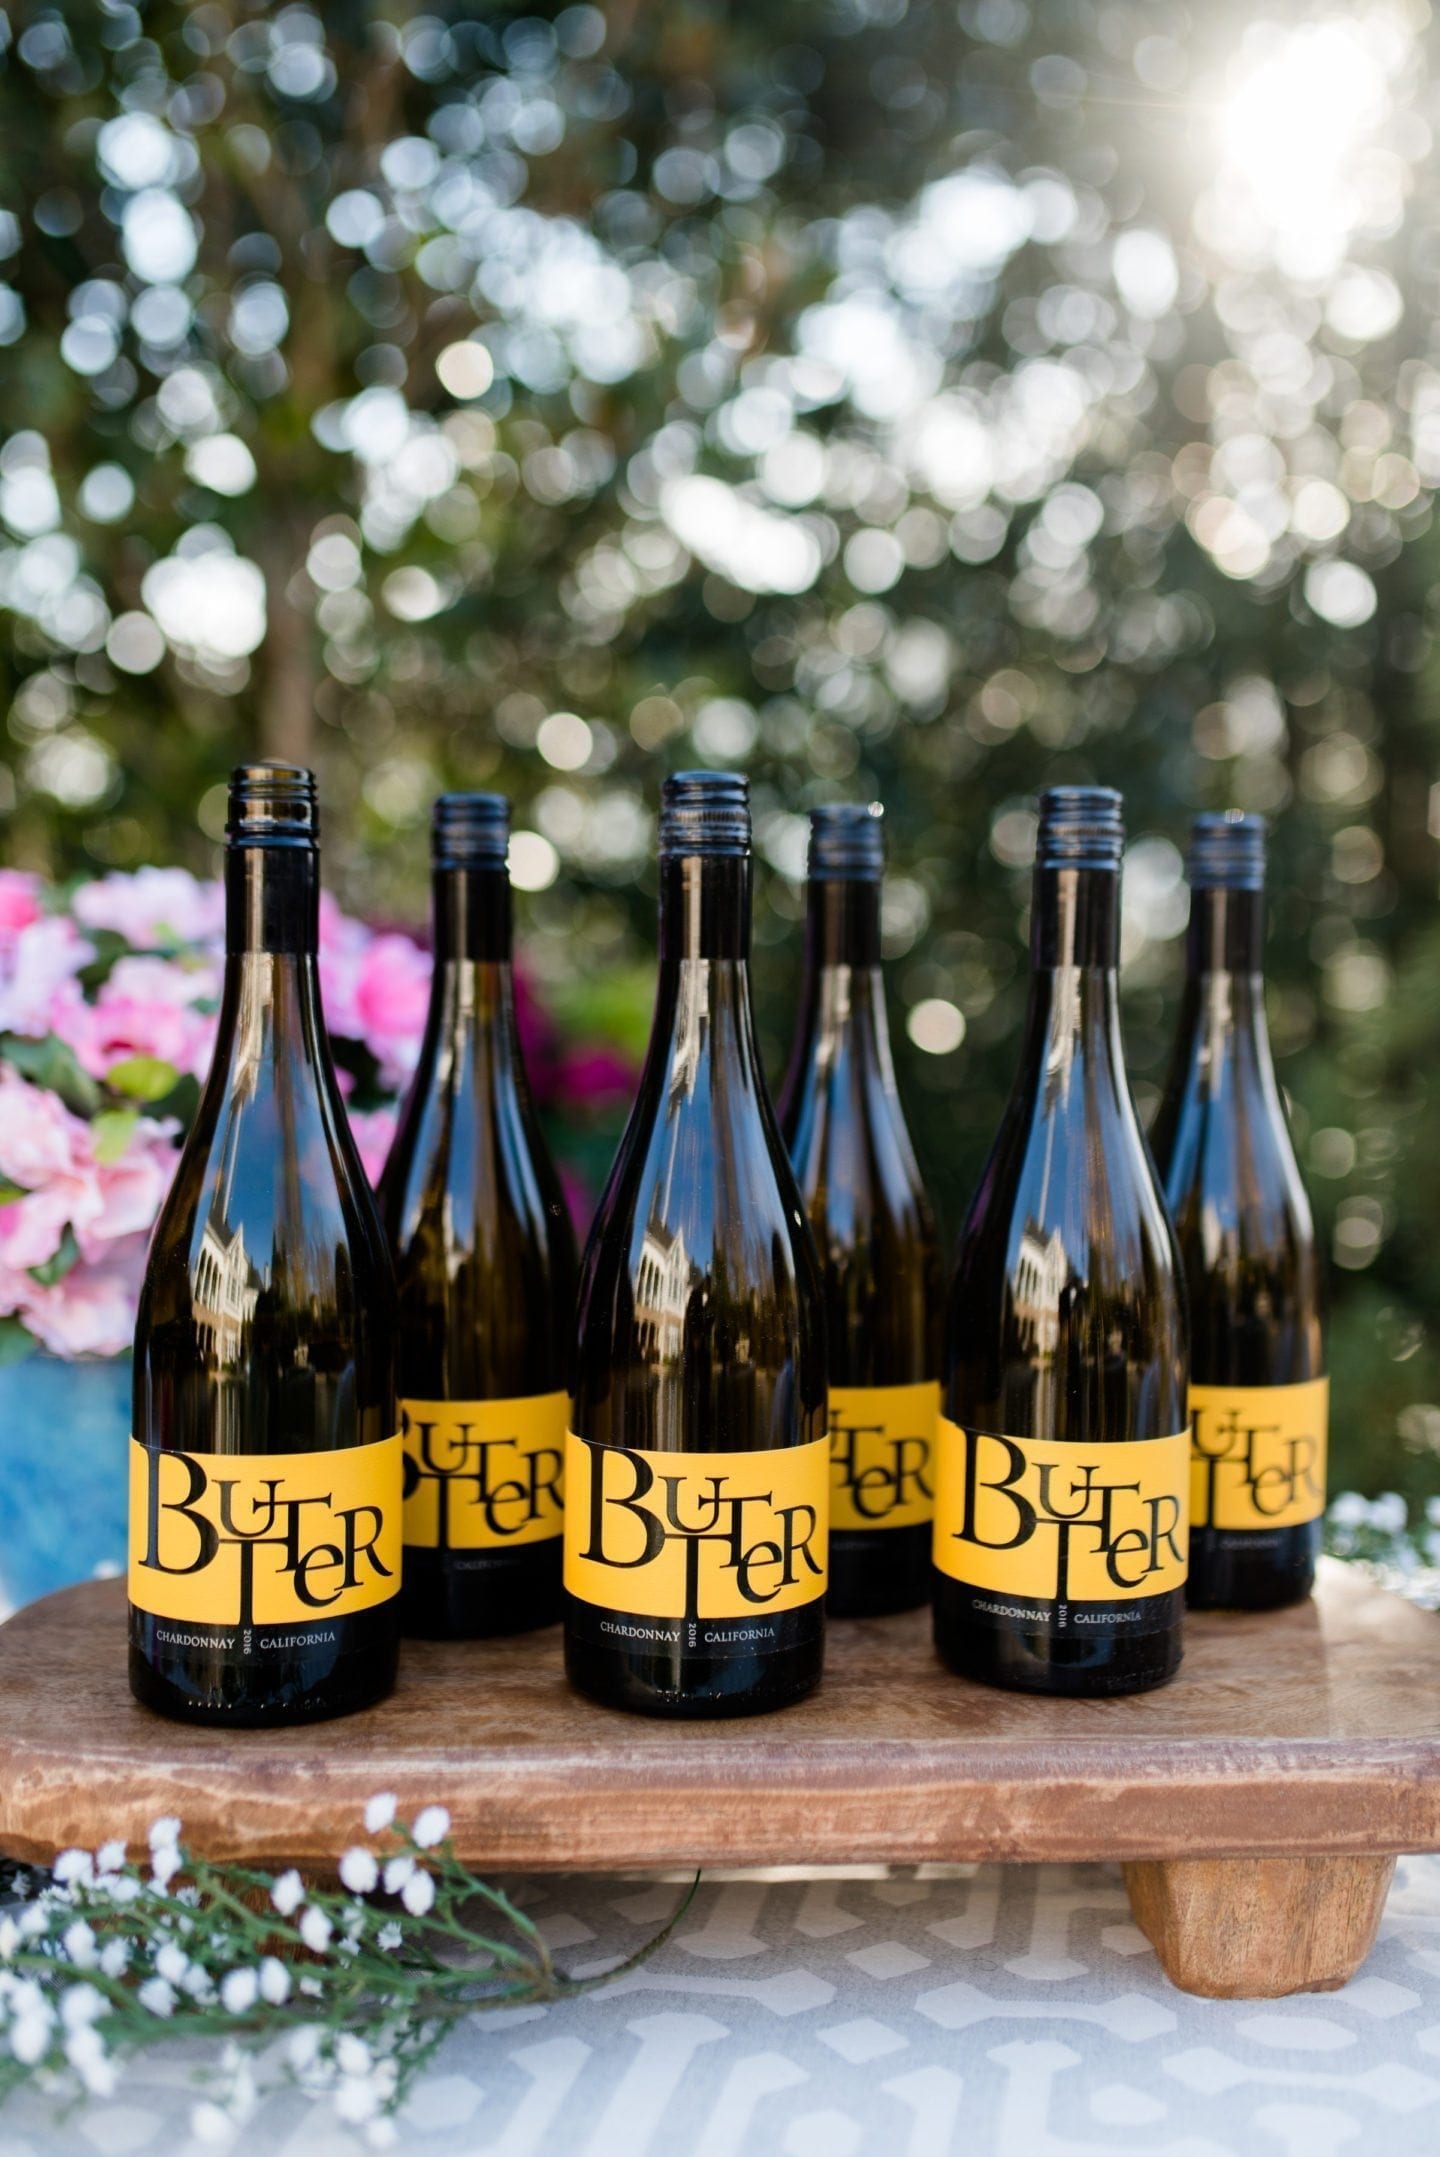 Easy to love Butter Chardonnay from JaM Cellars. Yummy Chardonnay that's perfect for spring parties!